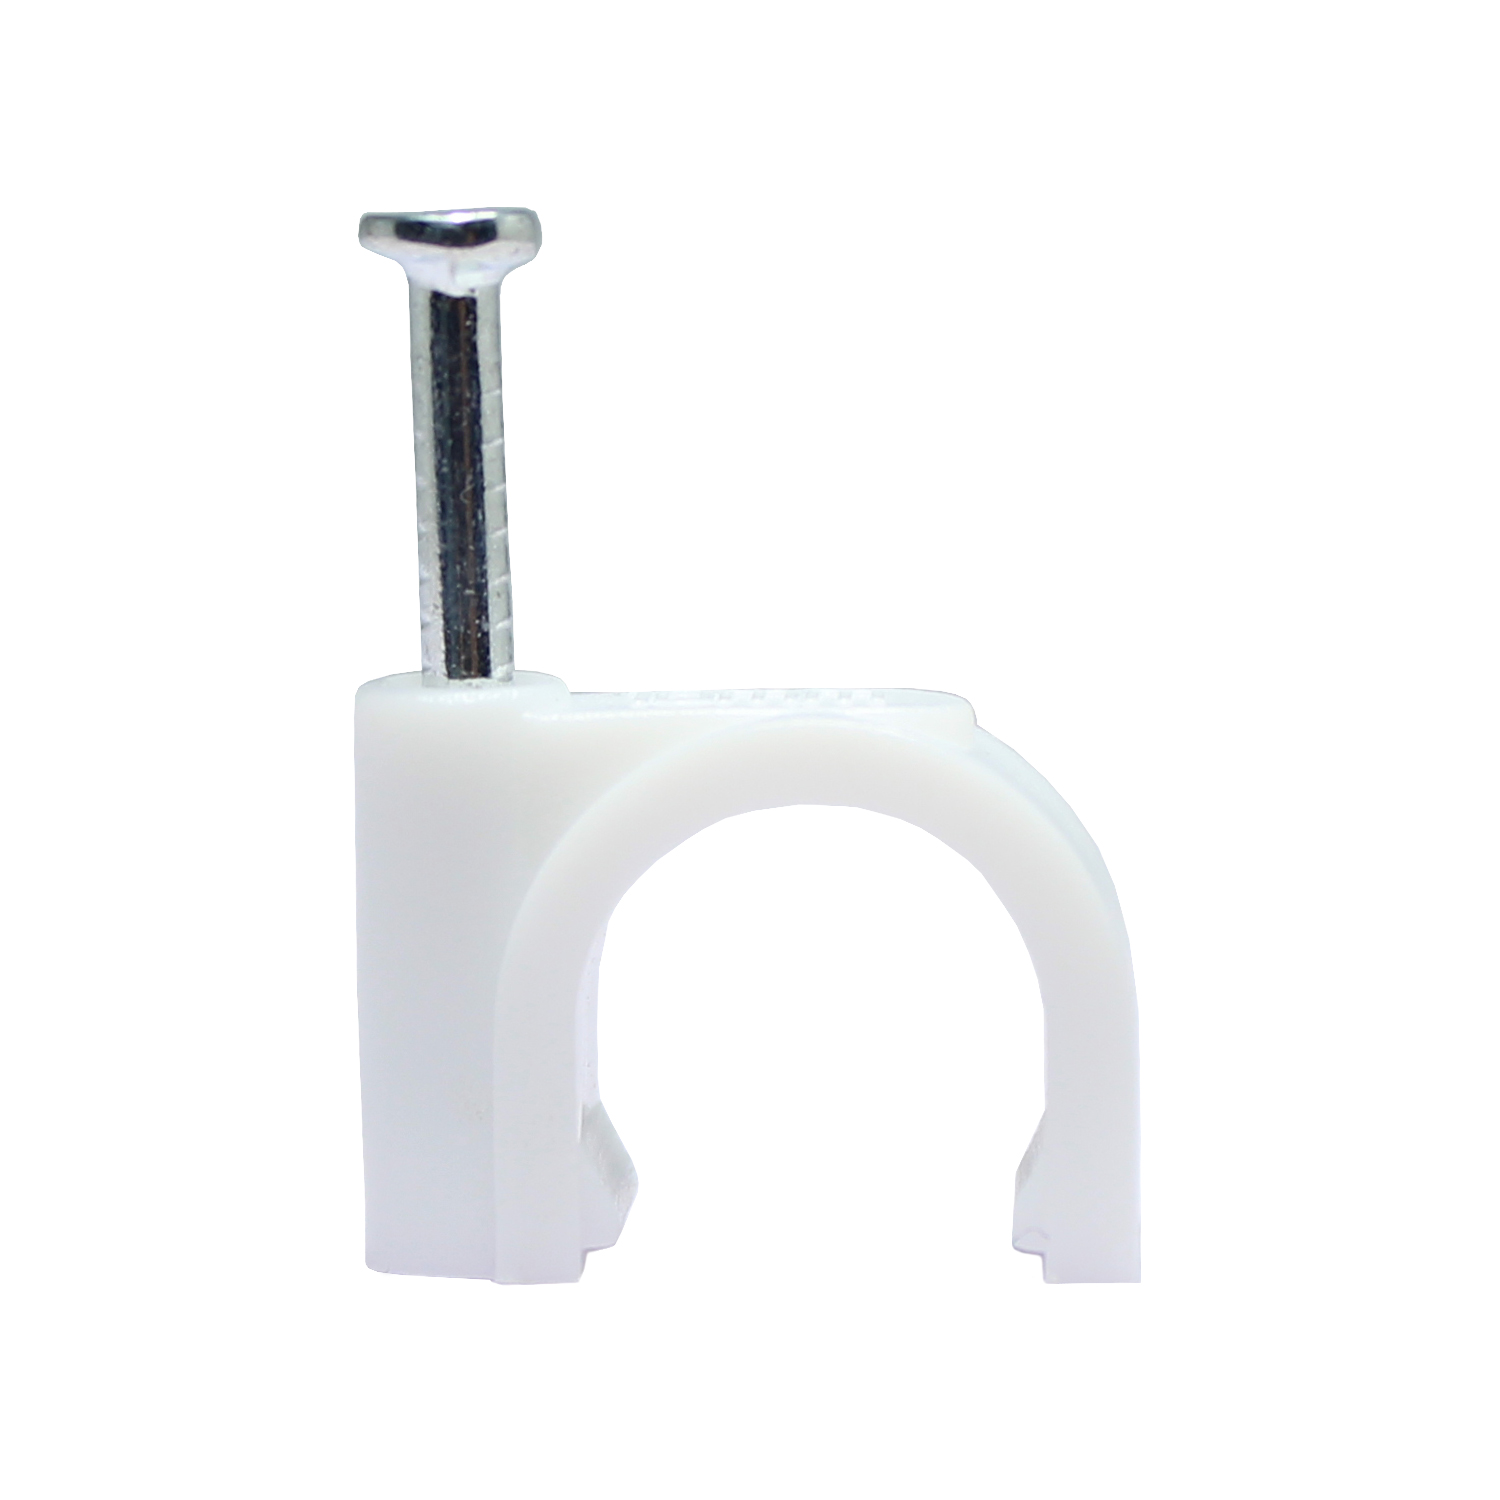 Cable-management-QualGear 10mm Cable Clips, White, 100 Pack, CC10